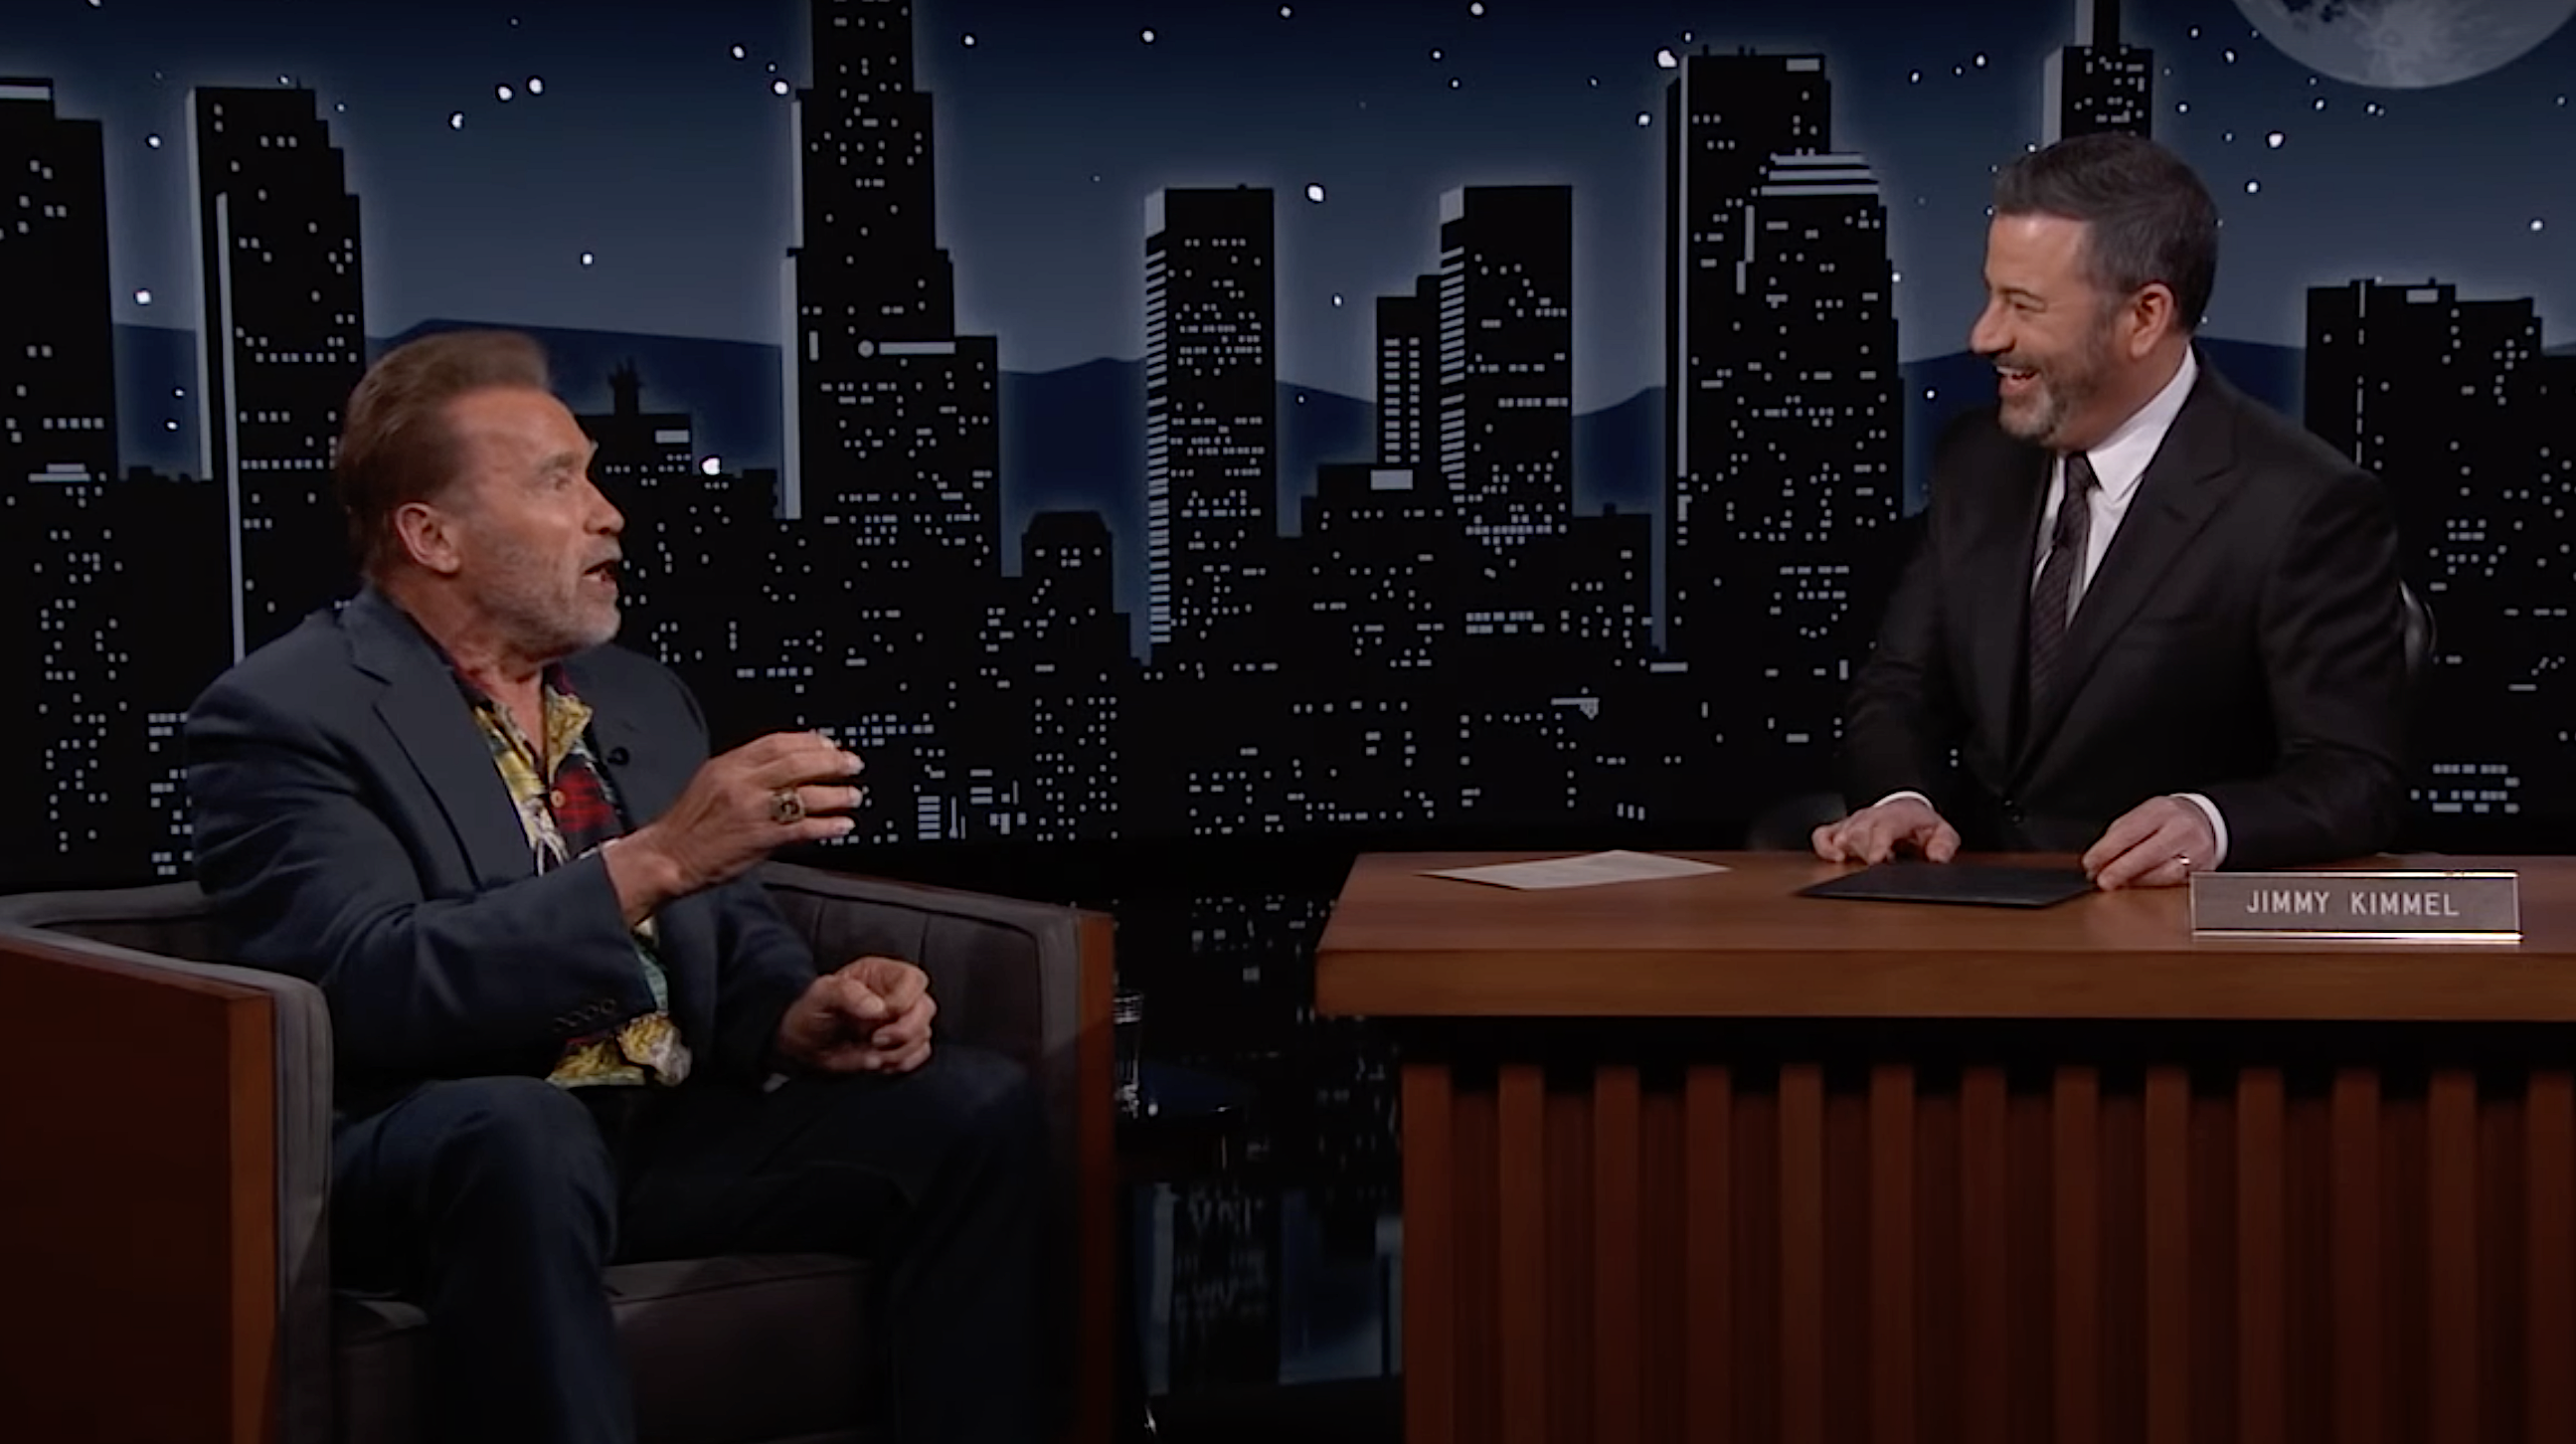 Arnold Schwarzenegger learned that you really can’t prank Danny DeVito with weed